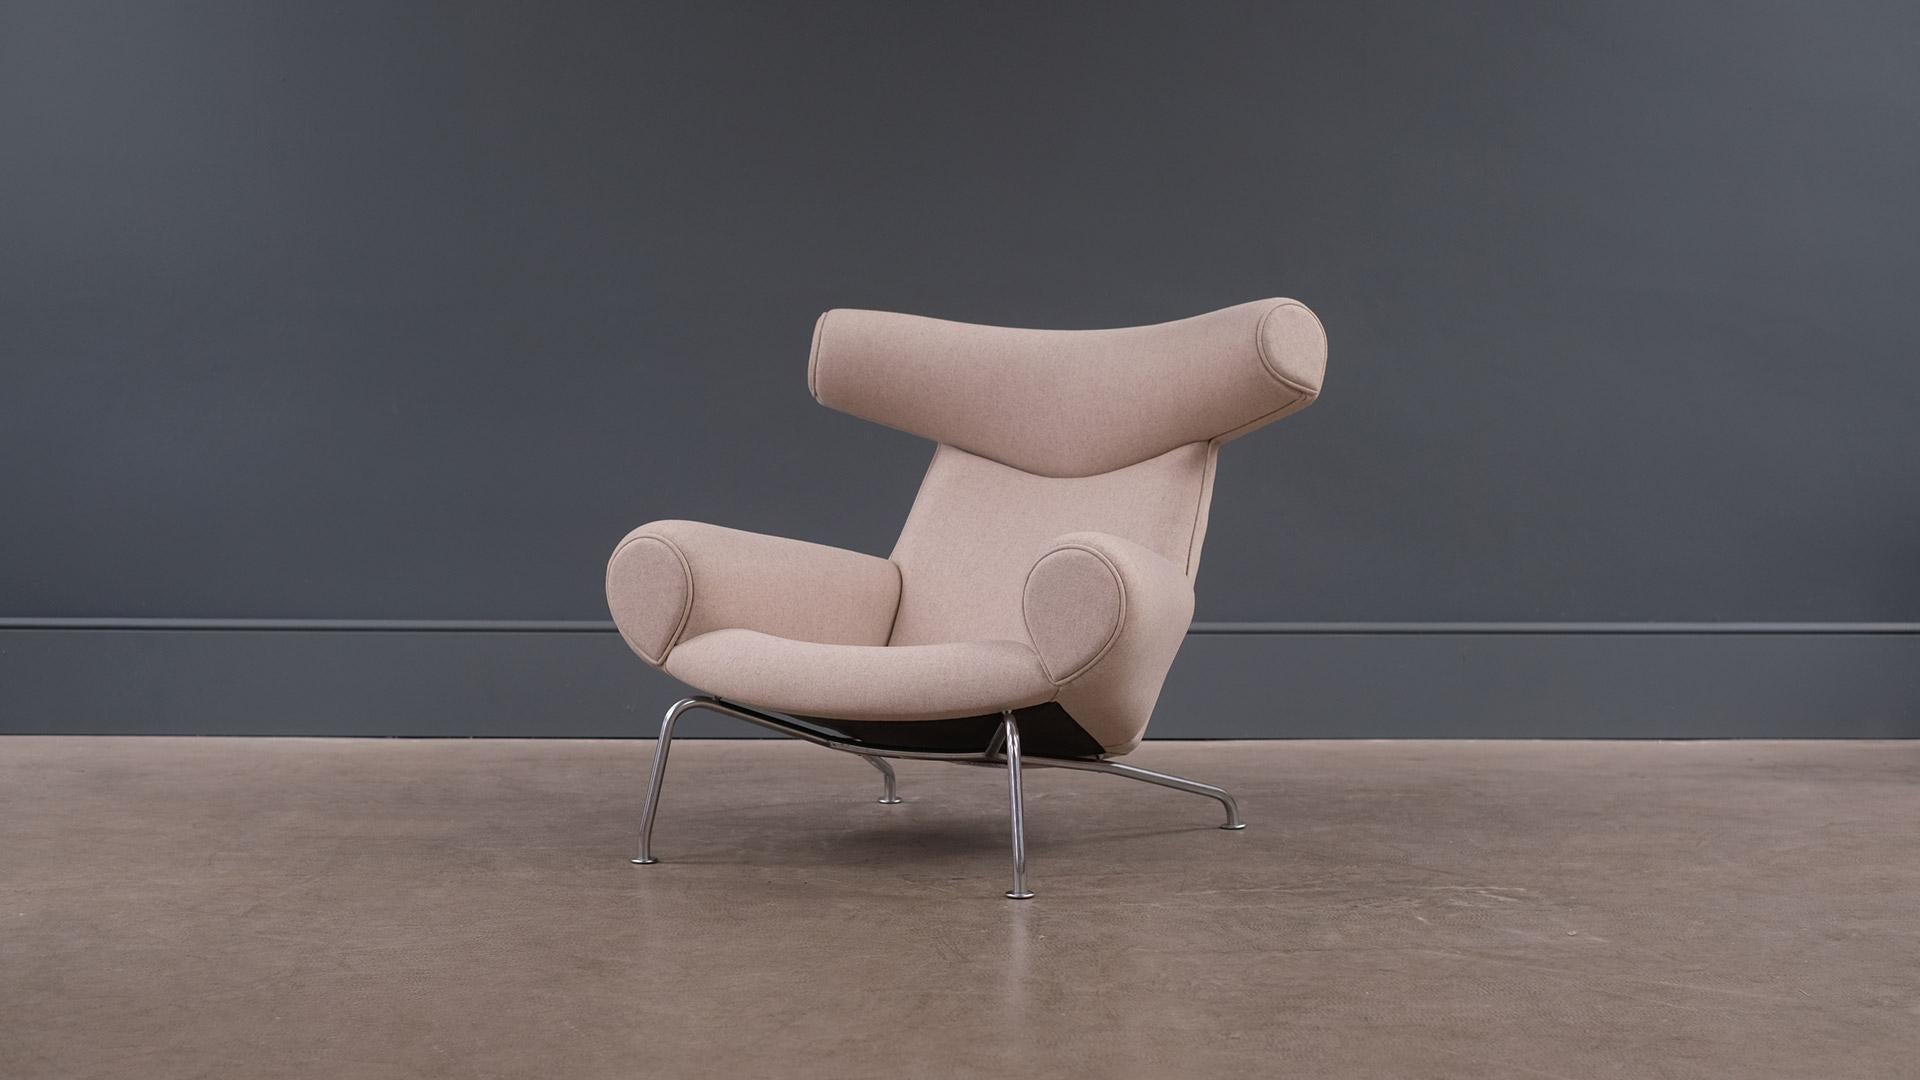 Amazing original Ox chair, model AP46, designed by Hans Wegner for AP Stolen, Denmark, 1960. Early example fully refurbished and reupholstered in grey / beige wool by Warwick. Wonderful and ultra rare piece of super collectable Hans Wegner